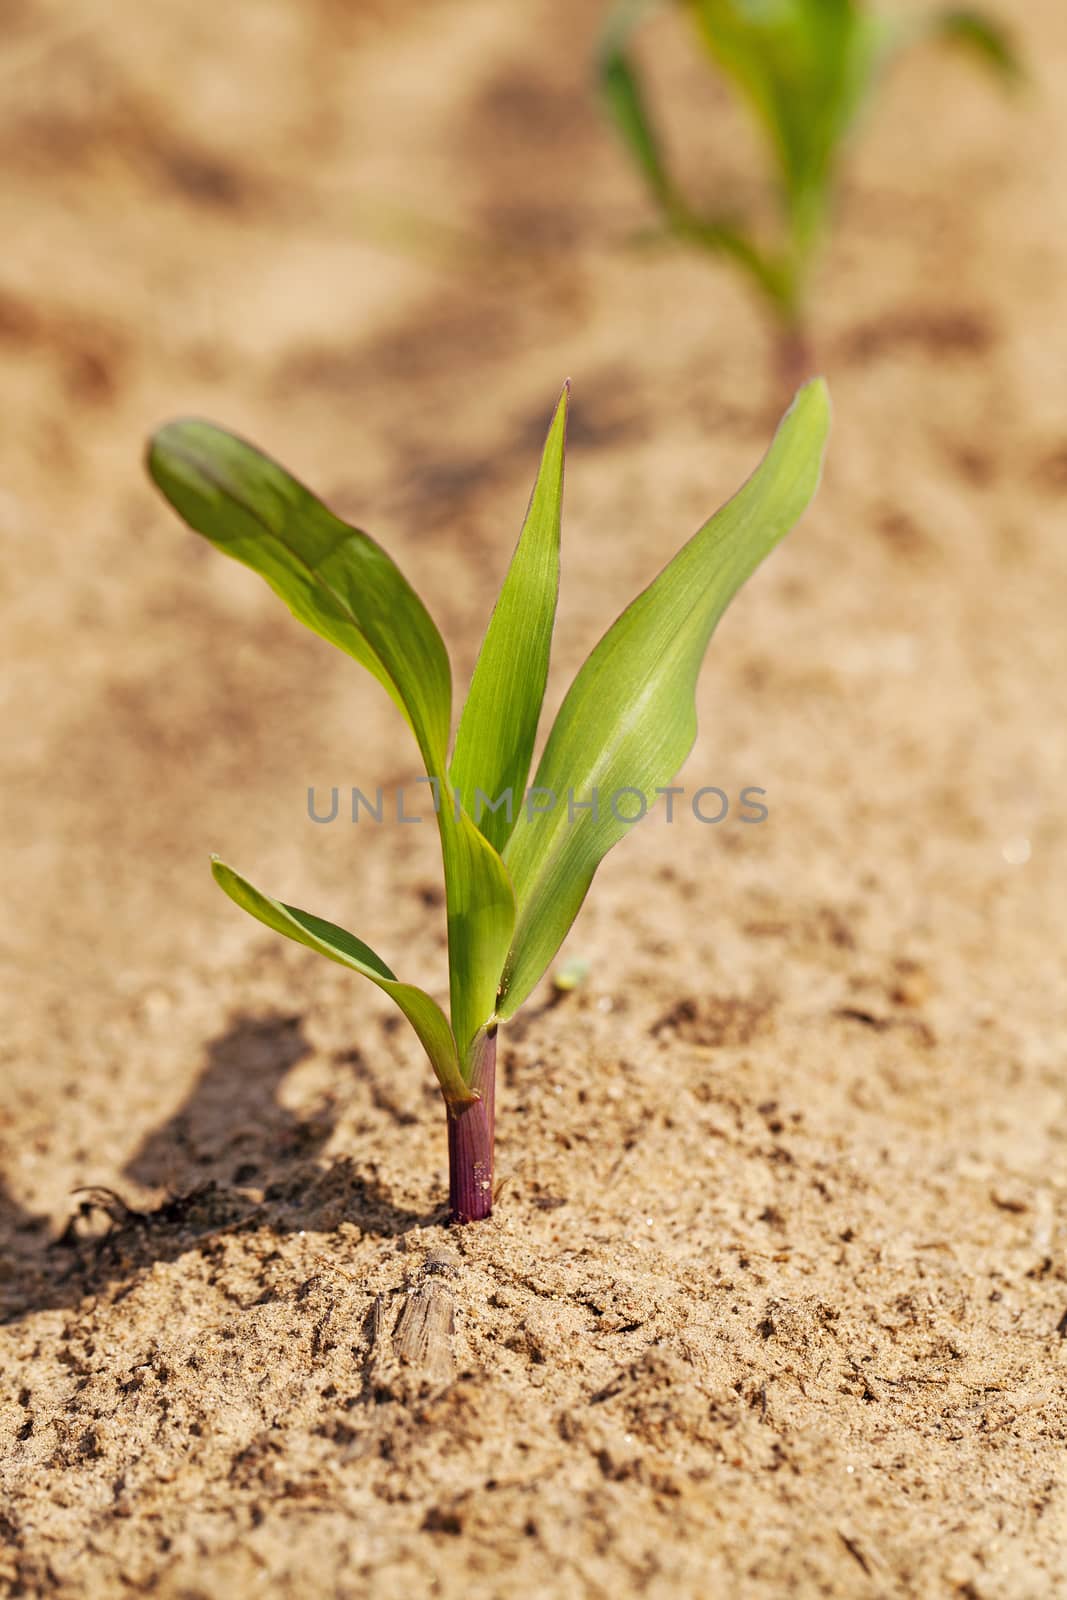   the small sprout of corn photographed by a close up.